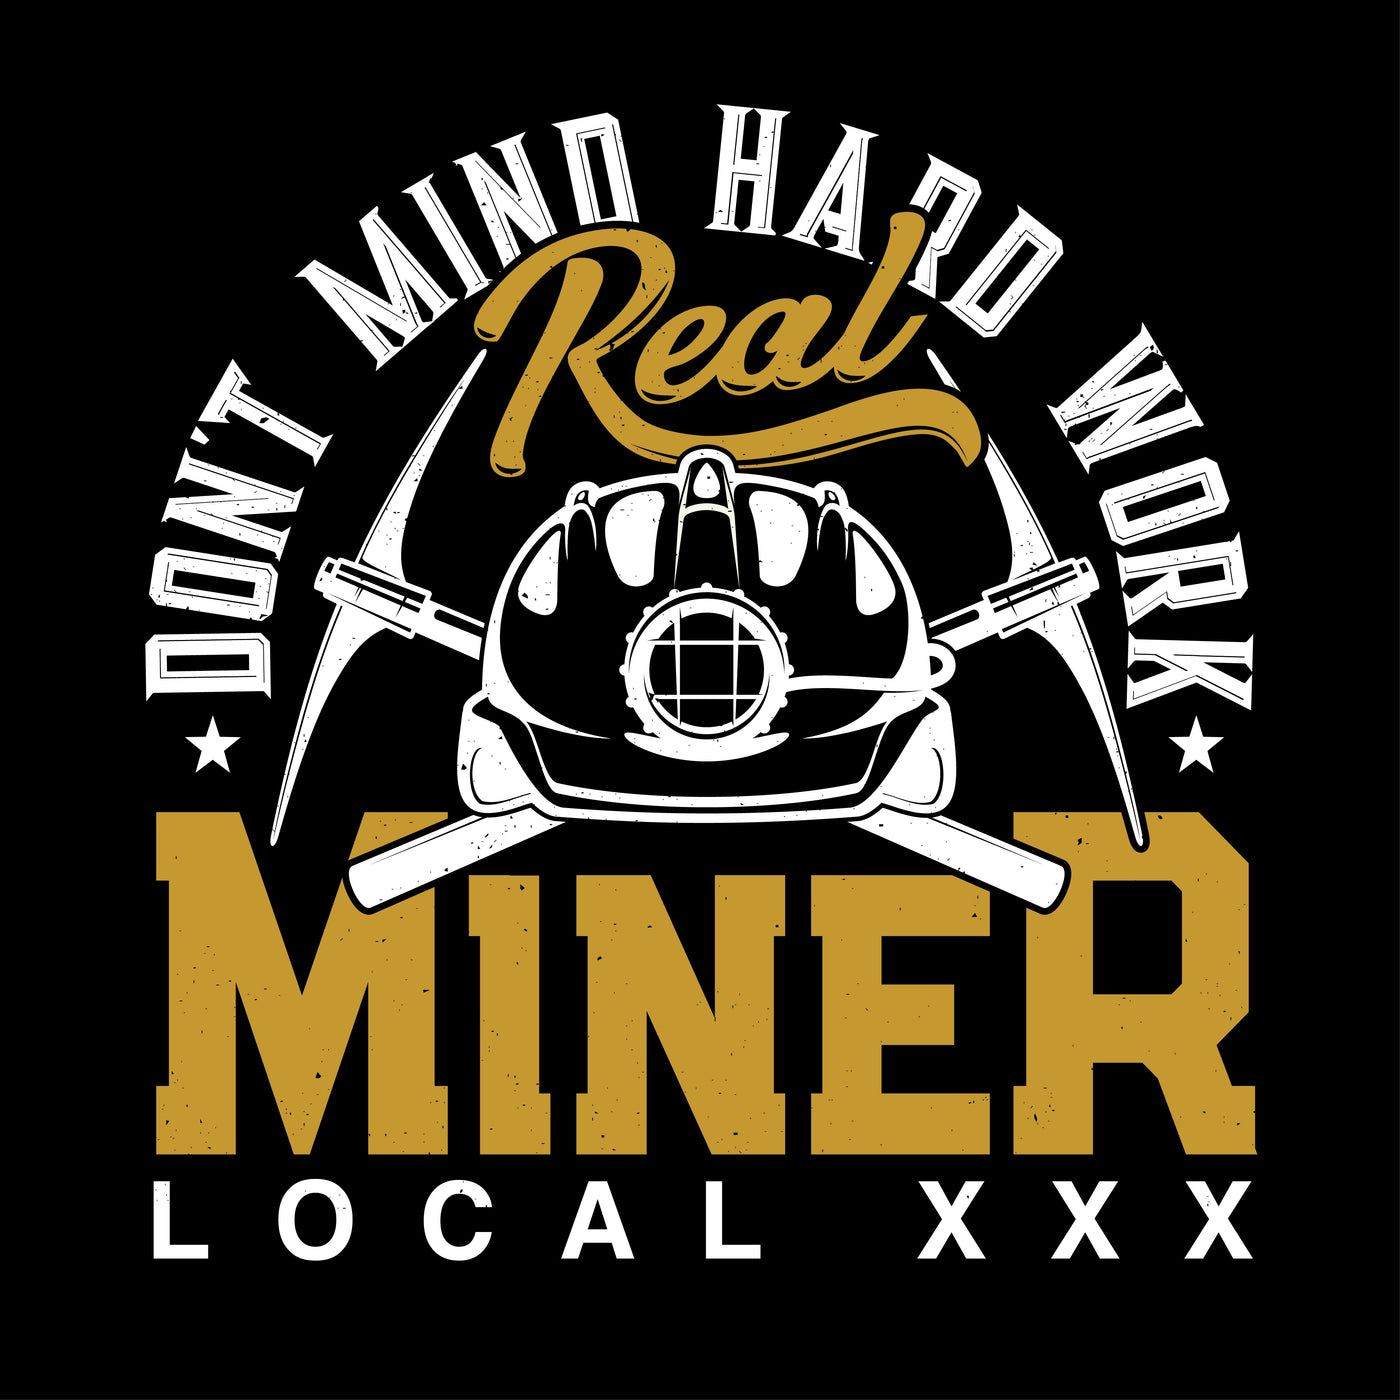 Real Miner